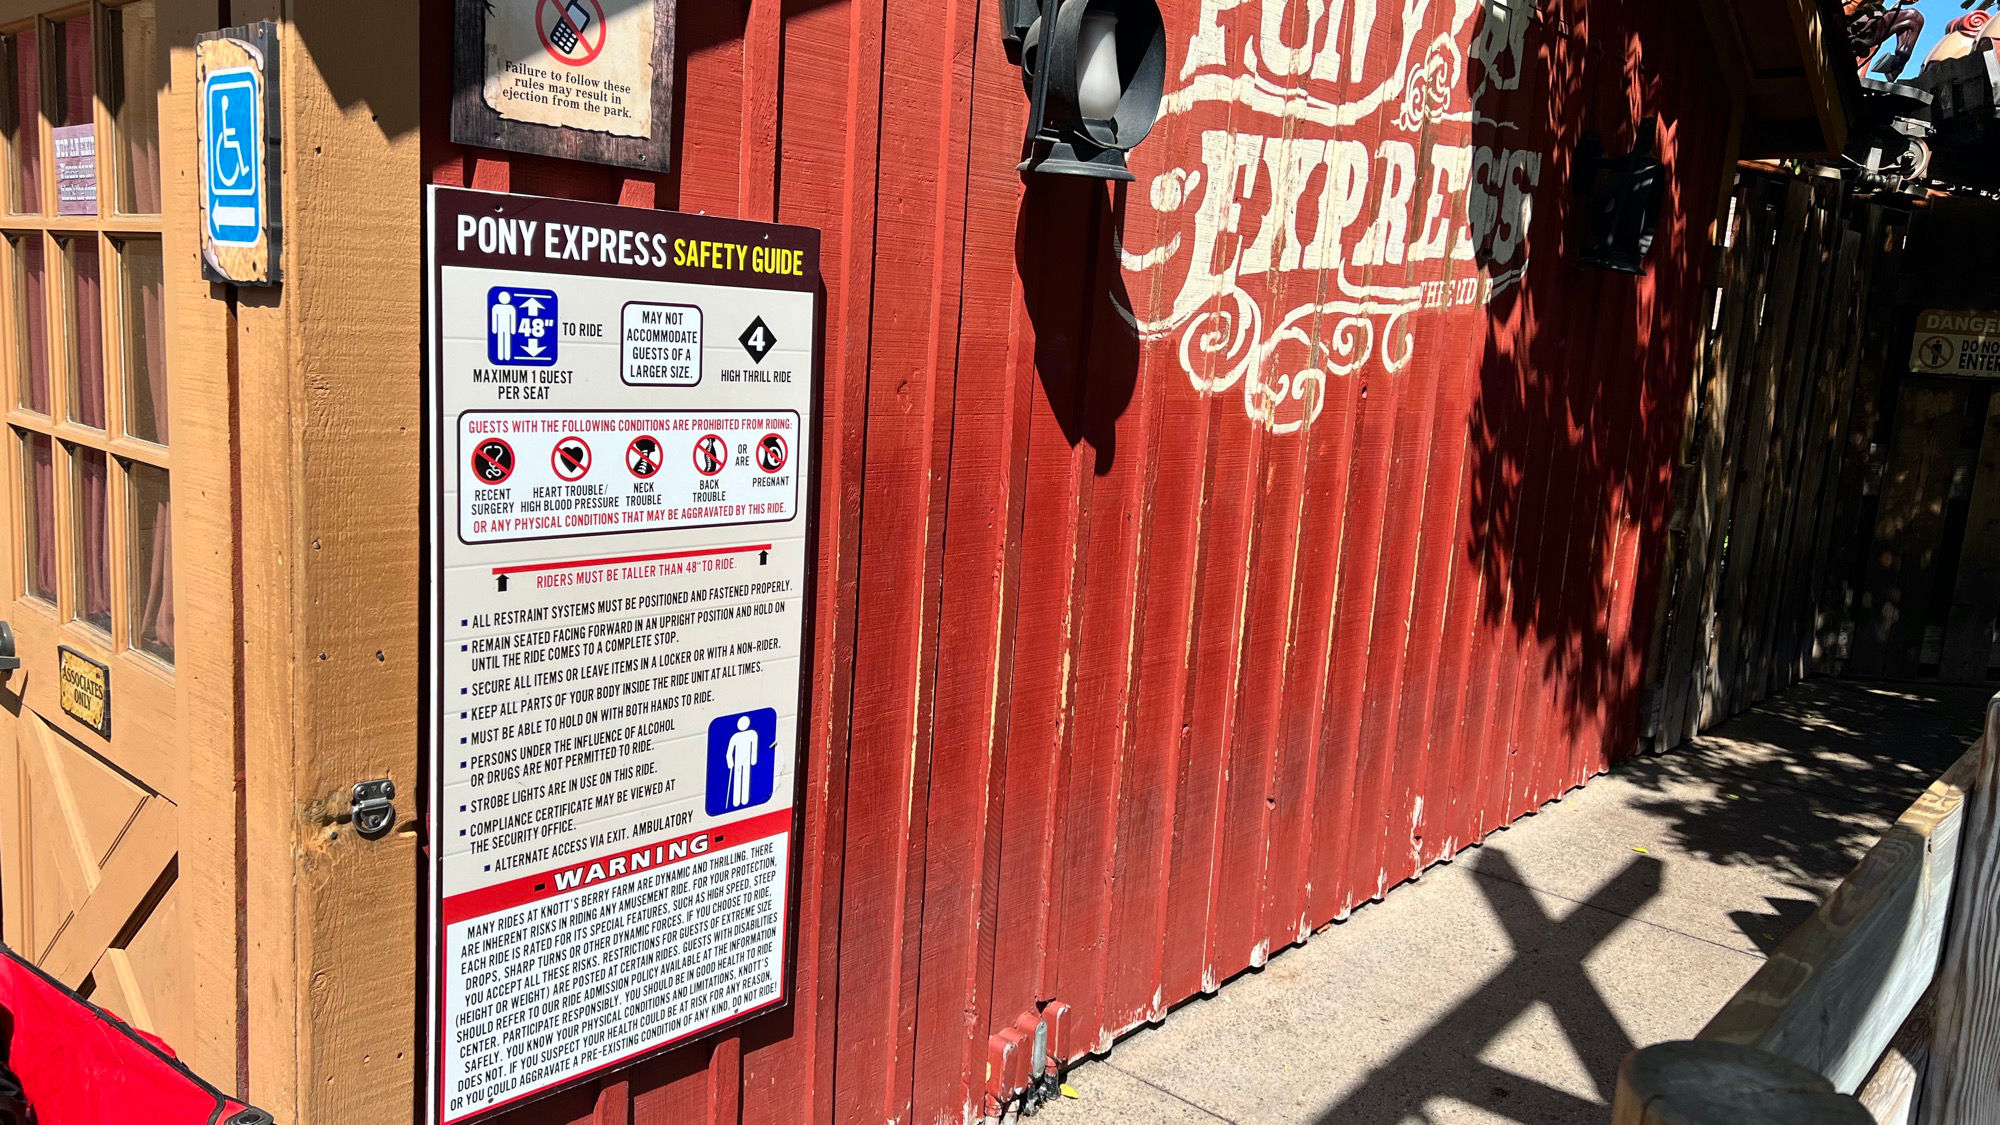 Pony Express Safety Guide